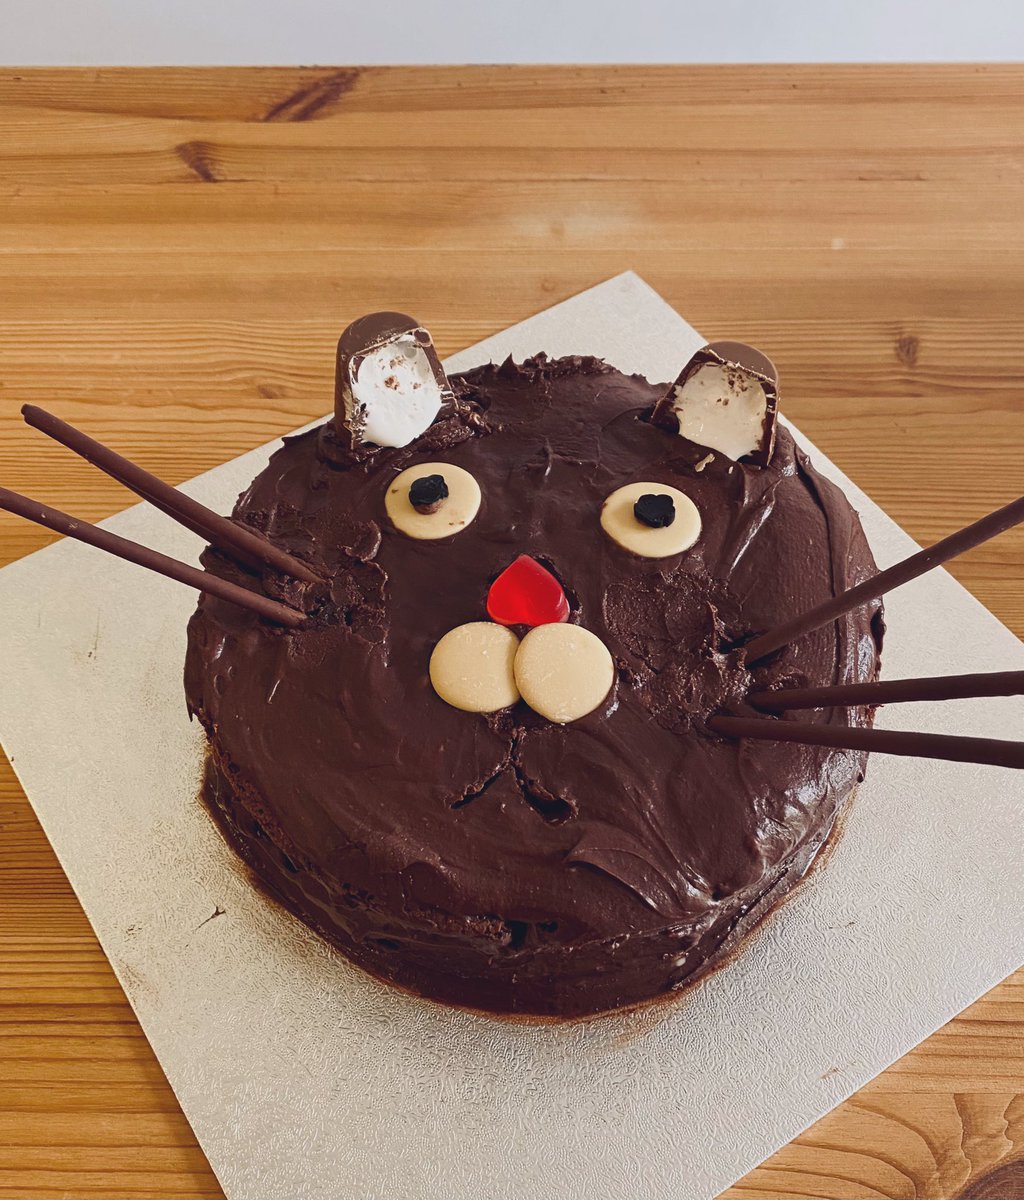 I’ll never win any prizes for my baking skills but my daughter asked for a cat face cake for her 8th birthday and so I created this. It took most of my evening last night, is an utter mess BUT it’s made with love ❤️